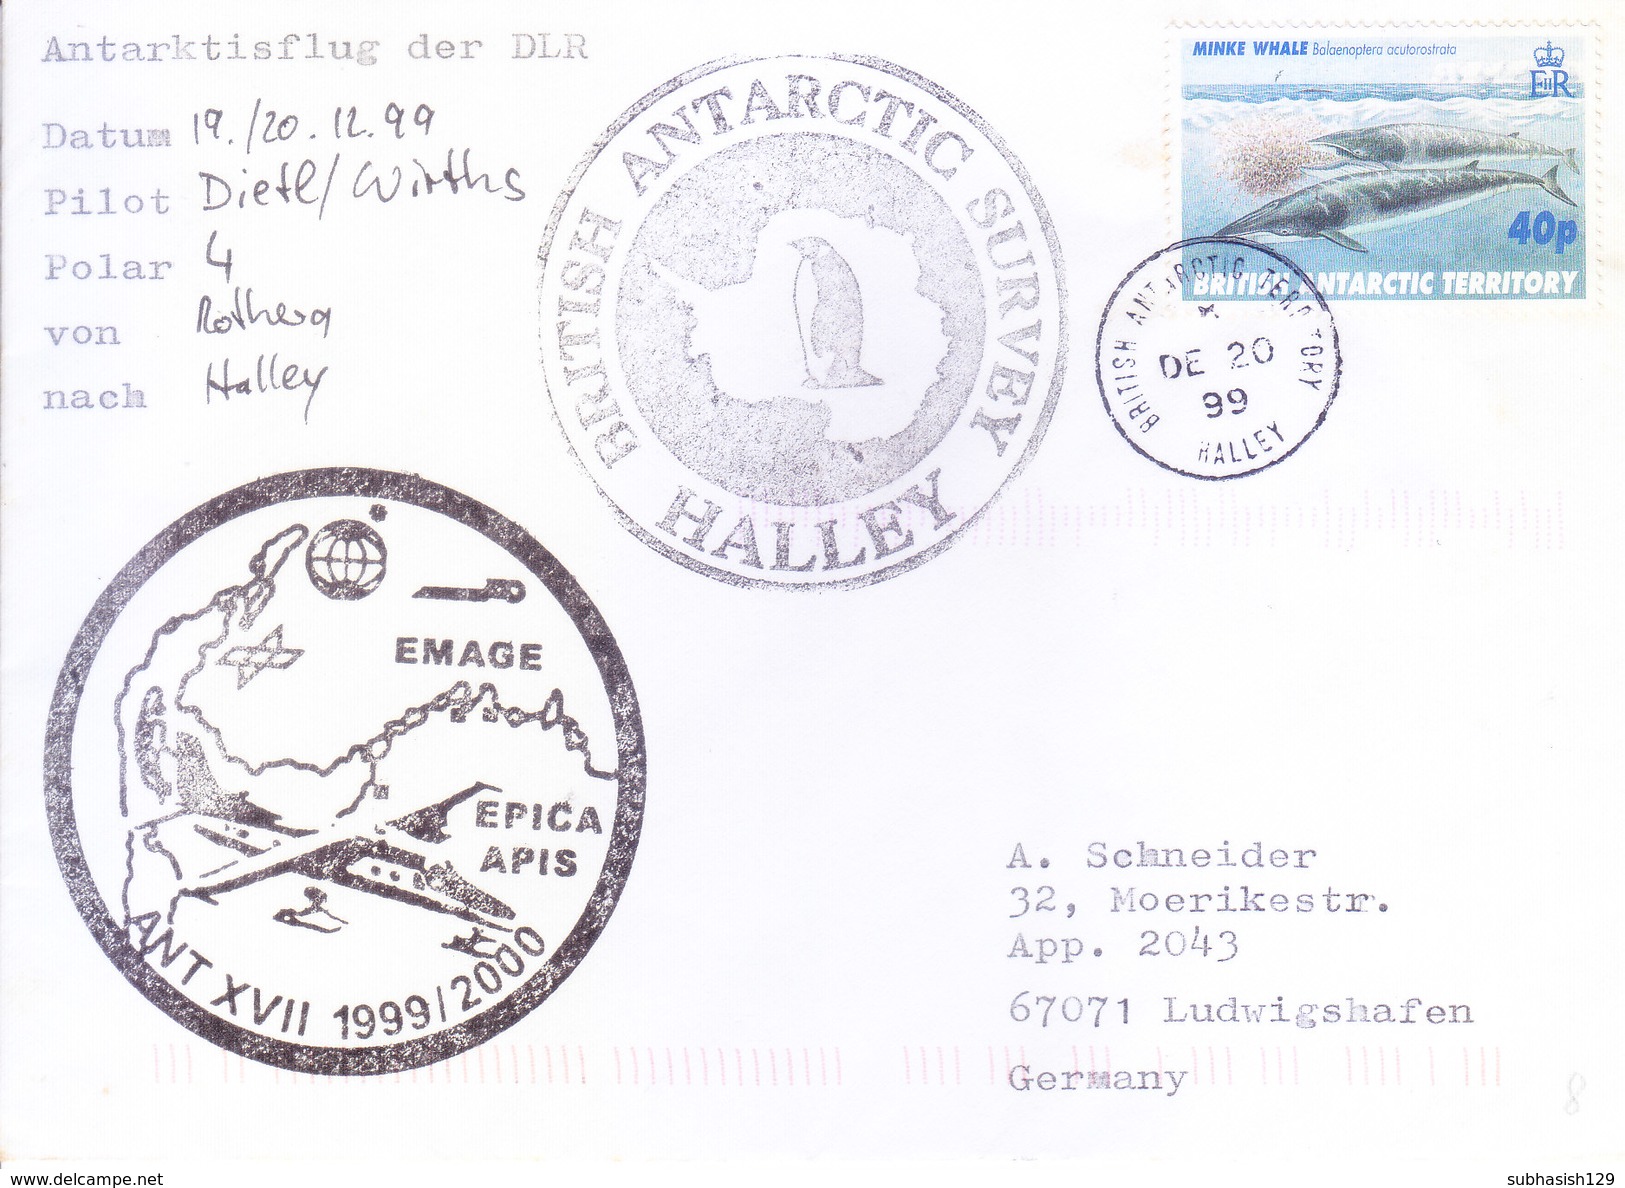 BRITISH ANTARCTIC TERRITORY - EXPEDITION COVER 1999, SPECIAL CANCELLATIONS, HALLEY, WITH EXPEDITION INFORMATIONS - Covers & Documents